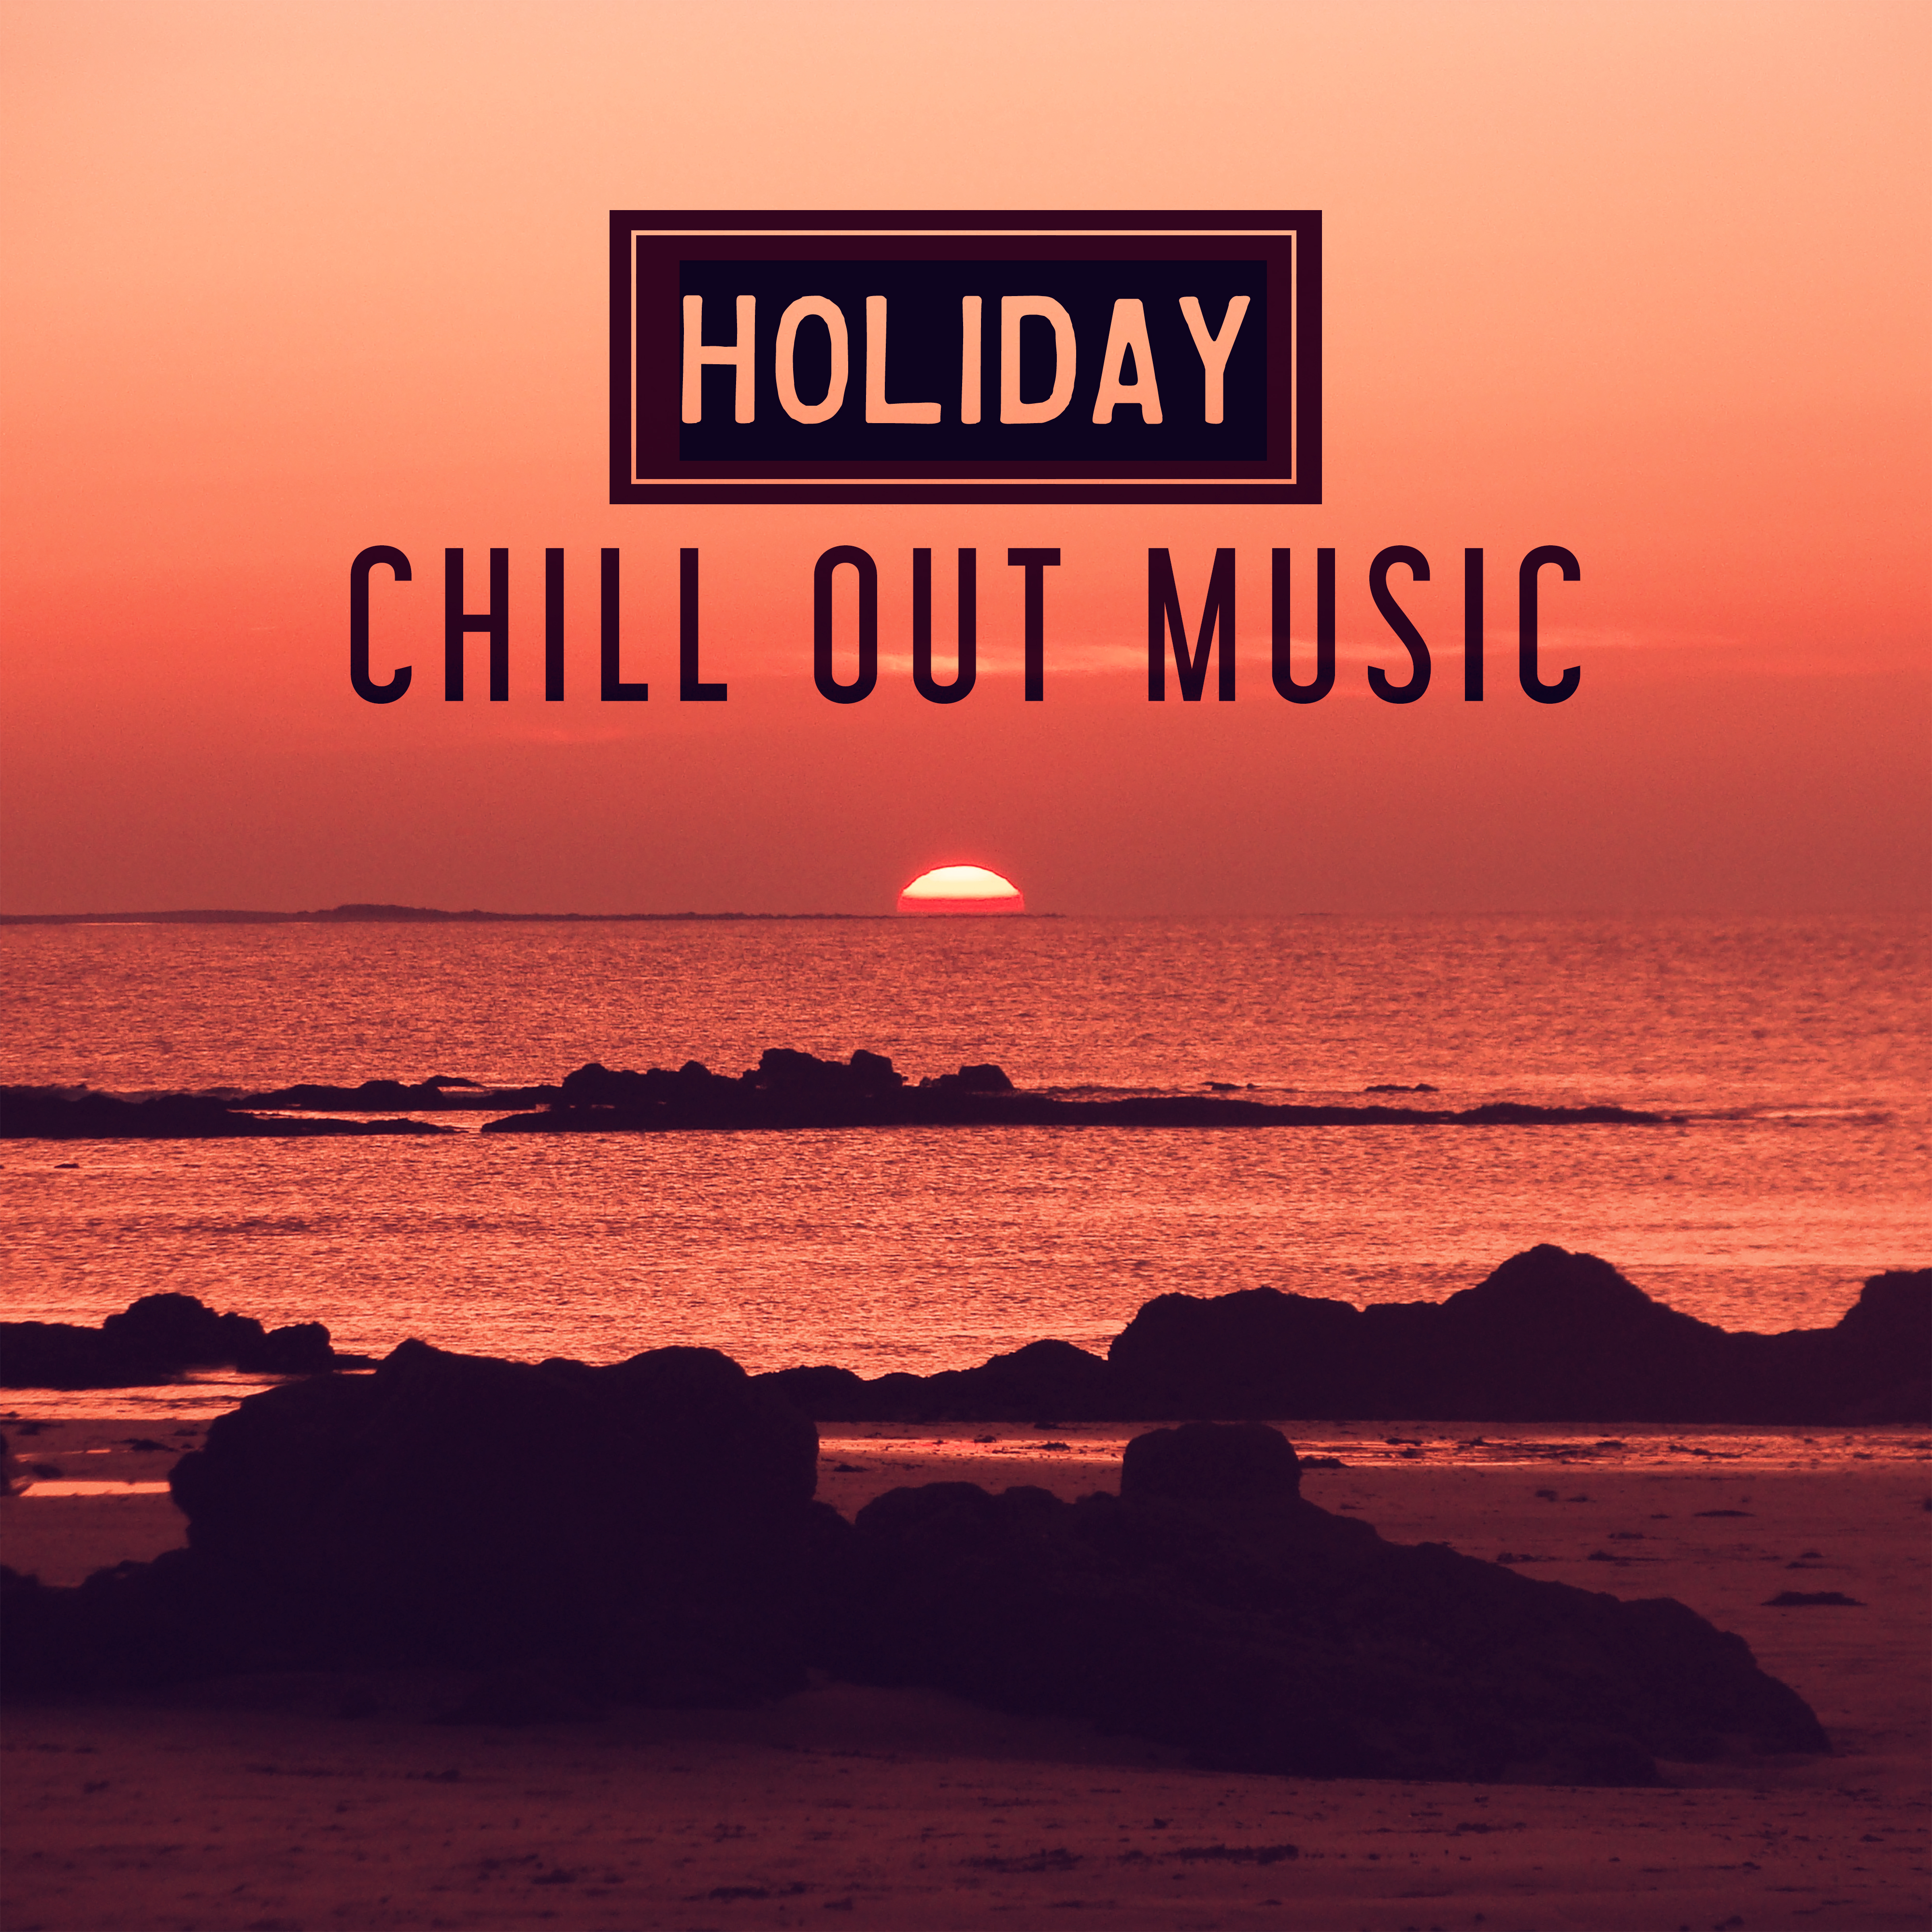 Holiday Chill Out Music – Summertime, Peaceful Mind, Total Relax, Ambient Music, Tropical Holiday, Pure Relaxation